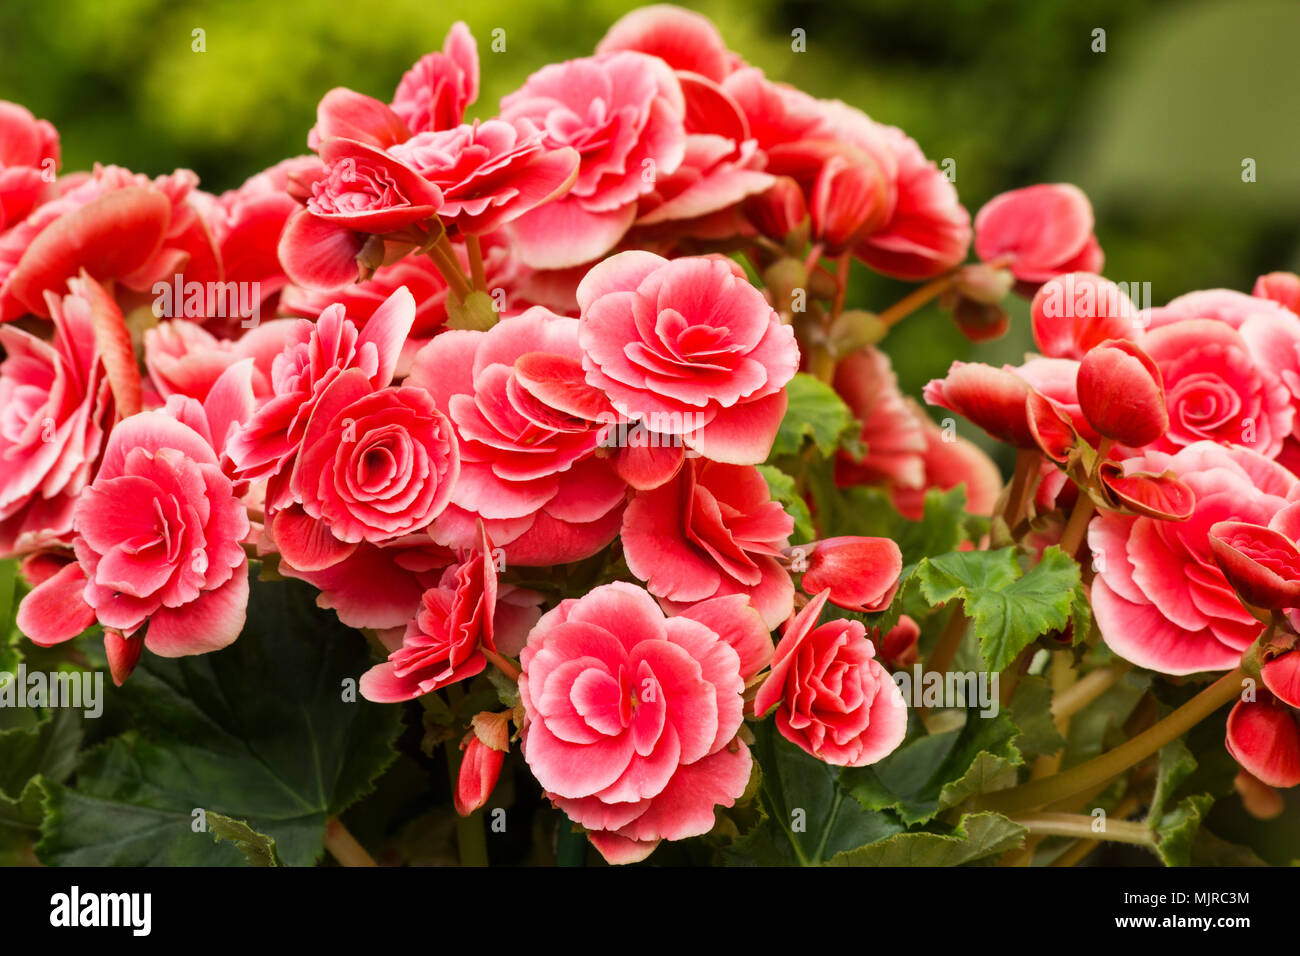 Begonia plant in full bloom Stock Photo